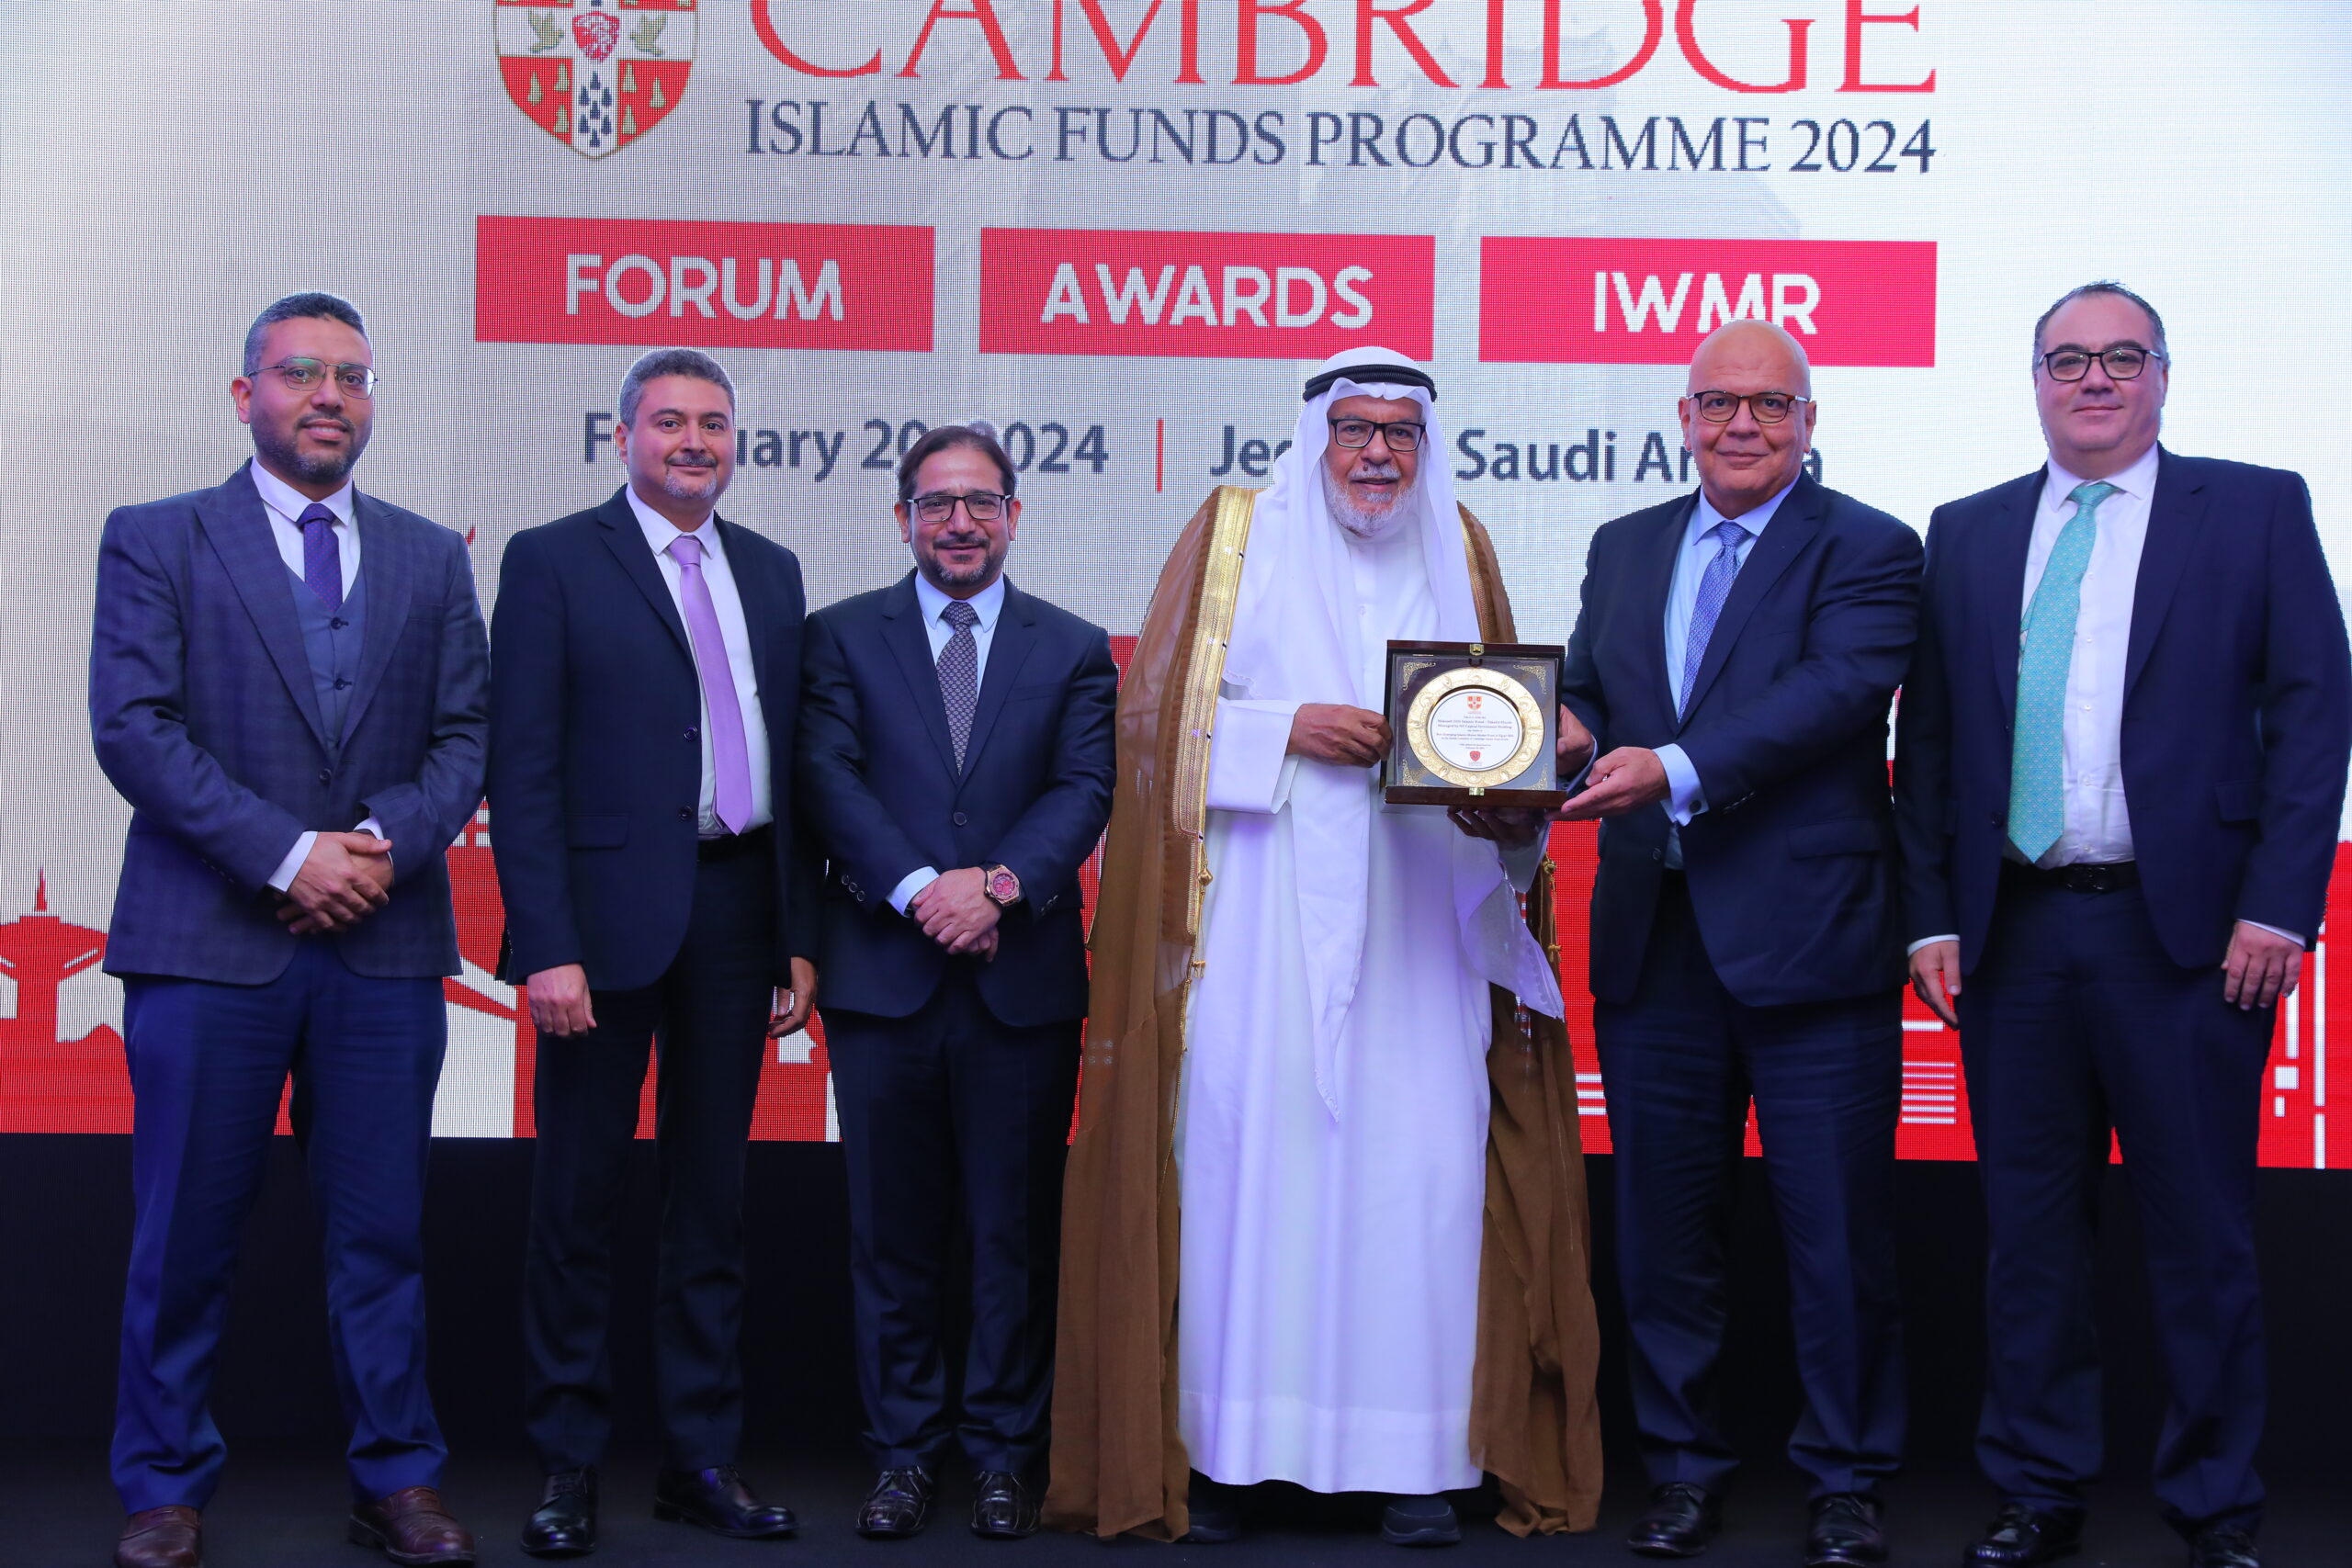 NI Capital Honored with Cambridge Islamic Fund Award for Best Emerging Islamic Money Market Fund in Egypt